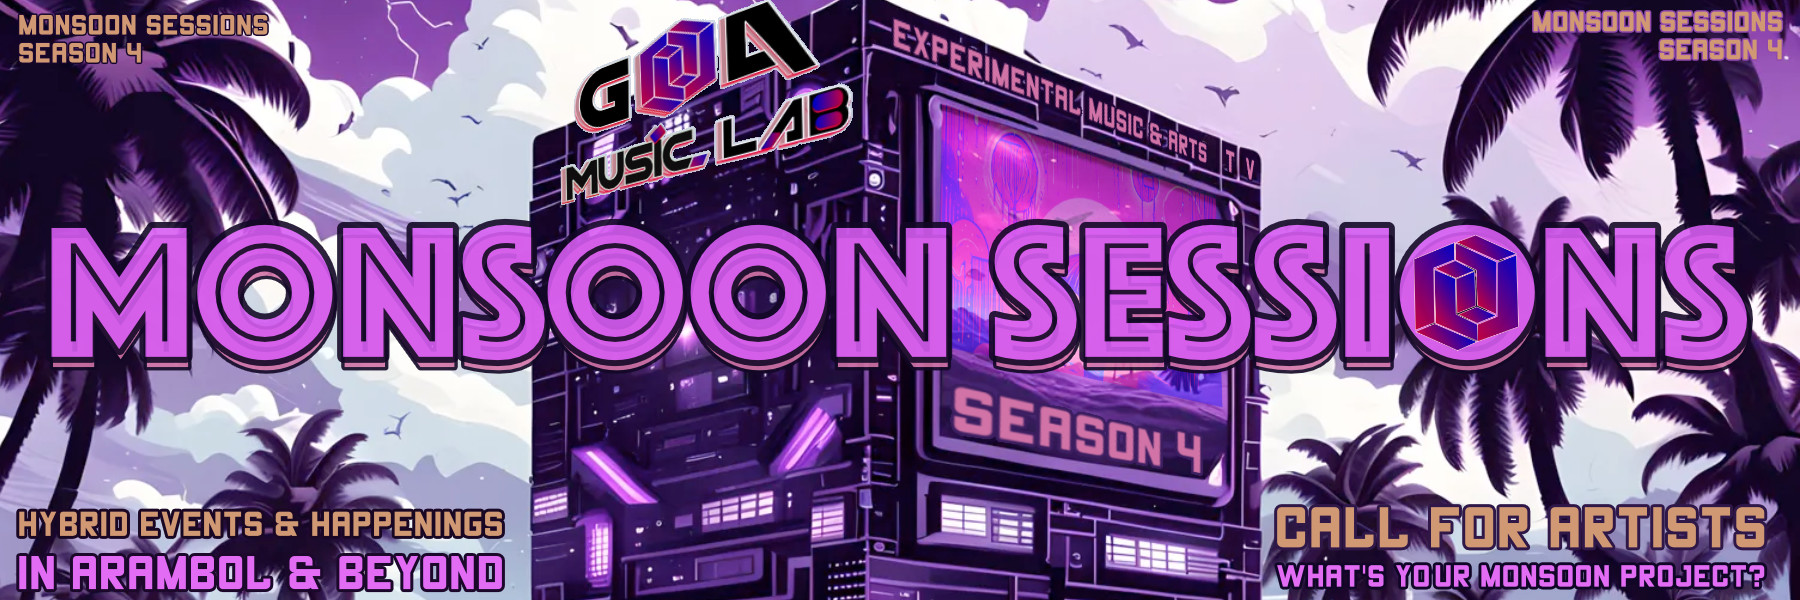 Monsoon Sessions Season 4 - Call for Artists